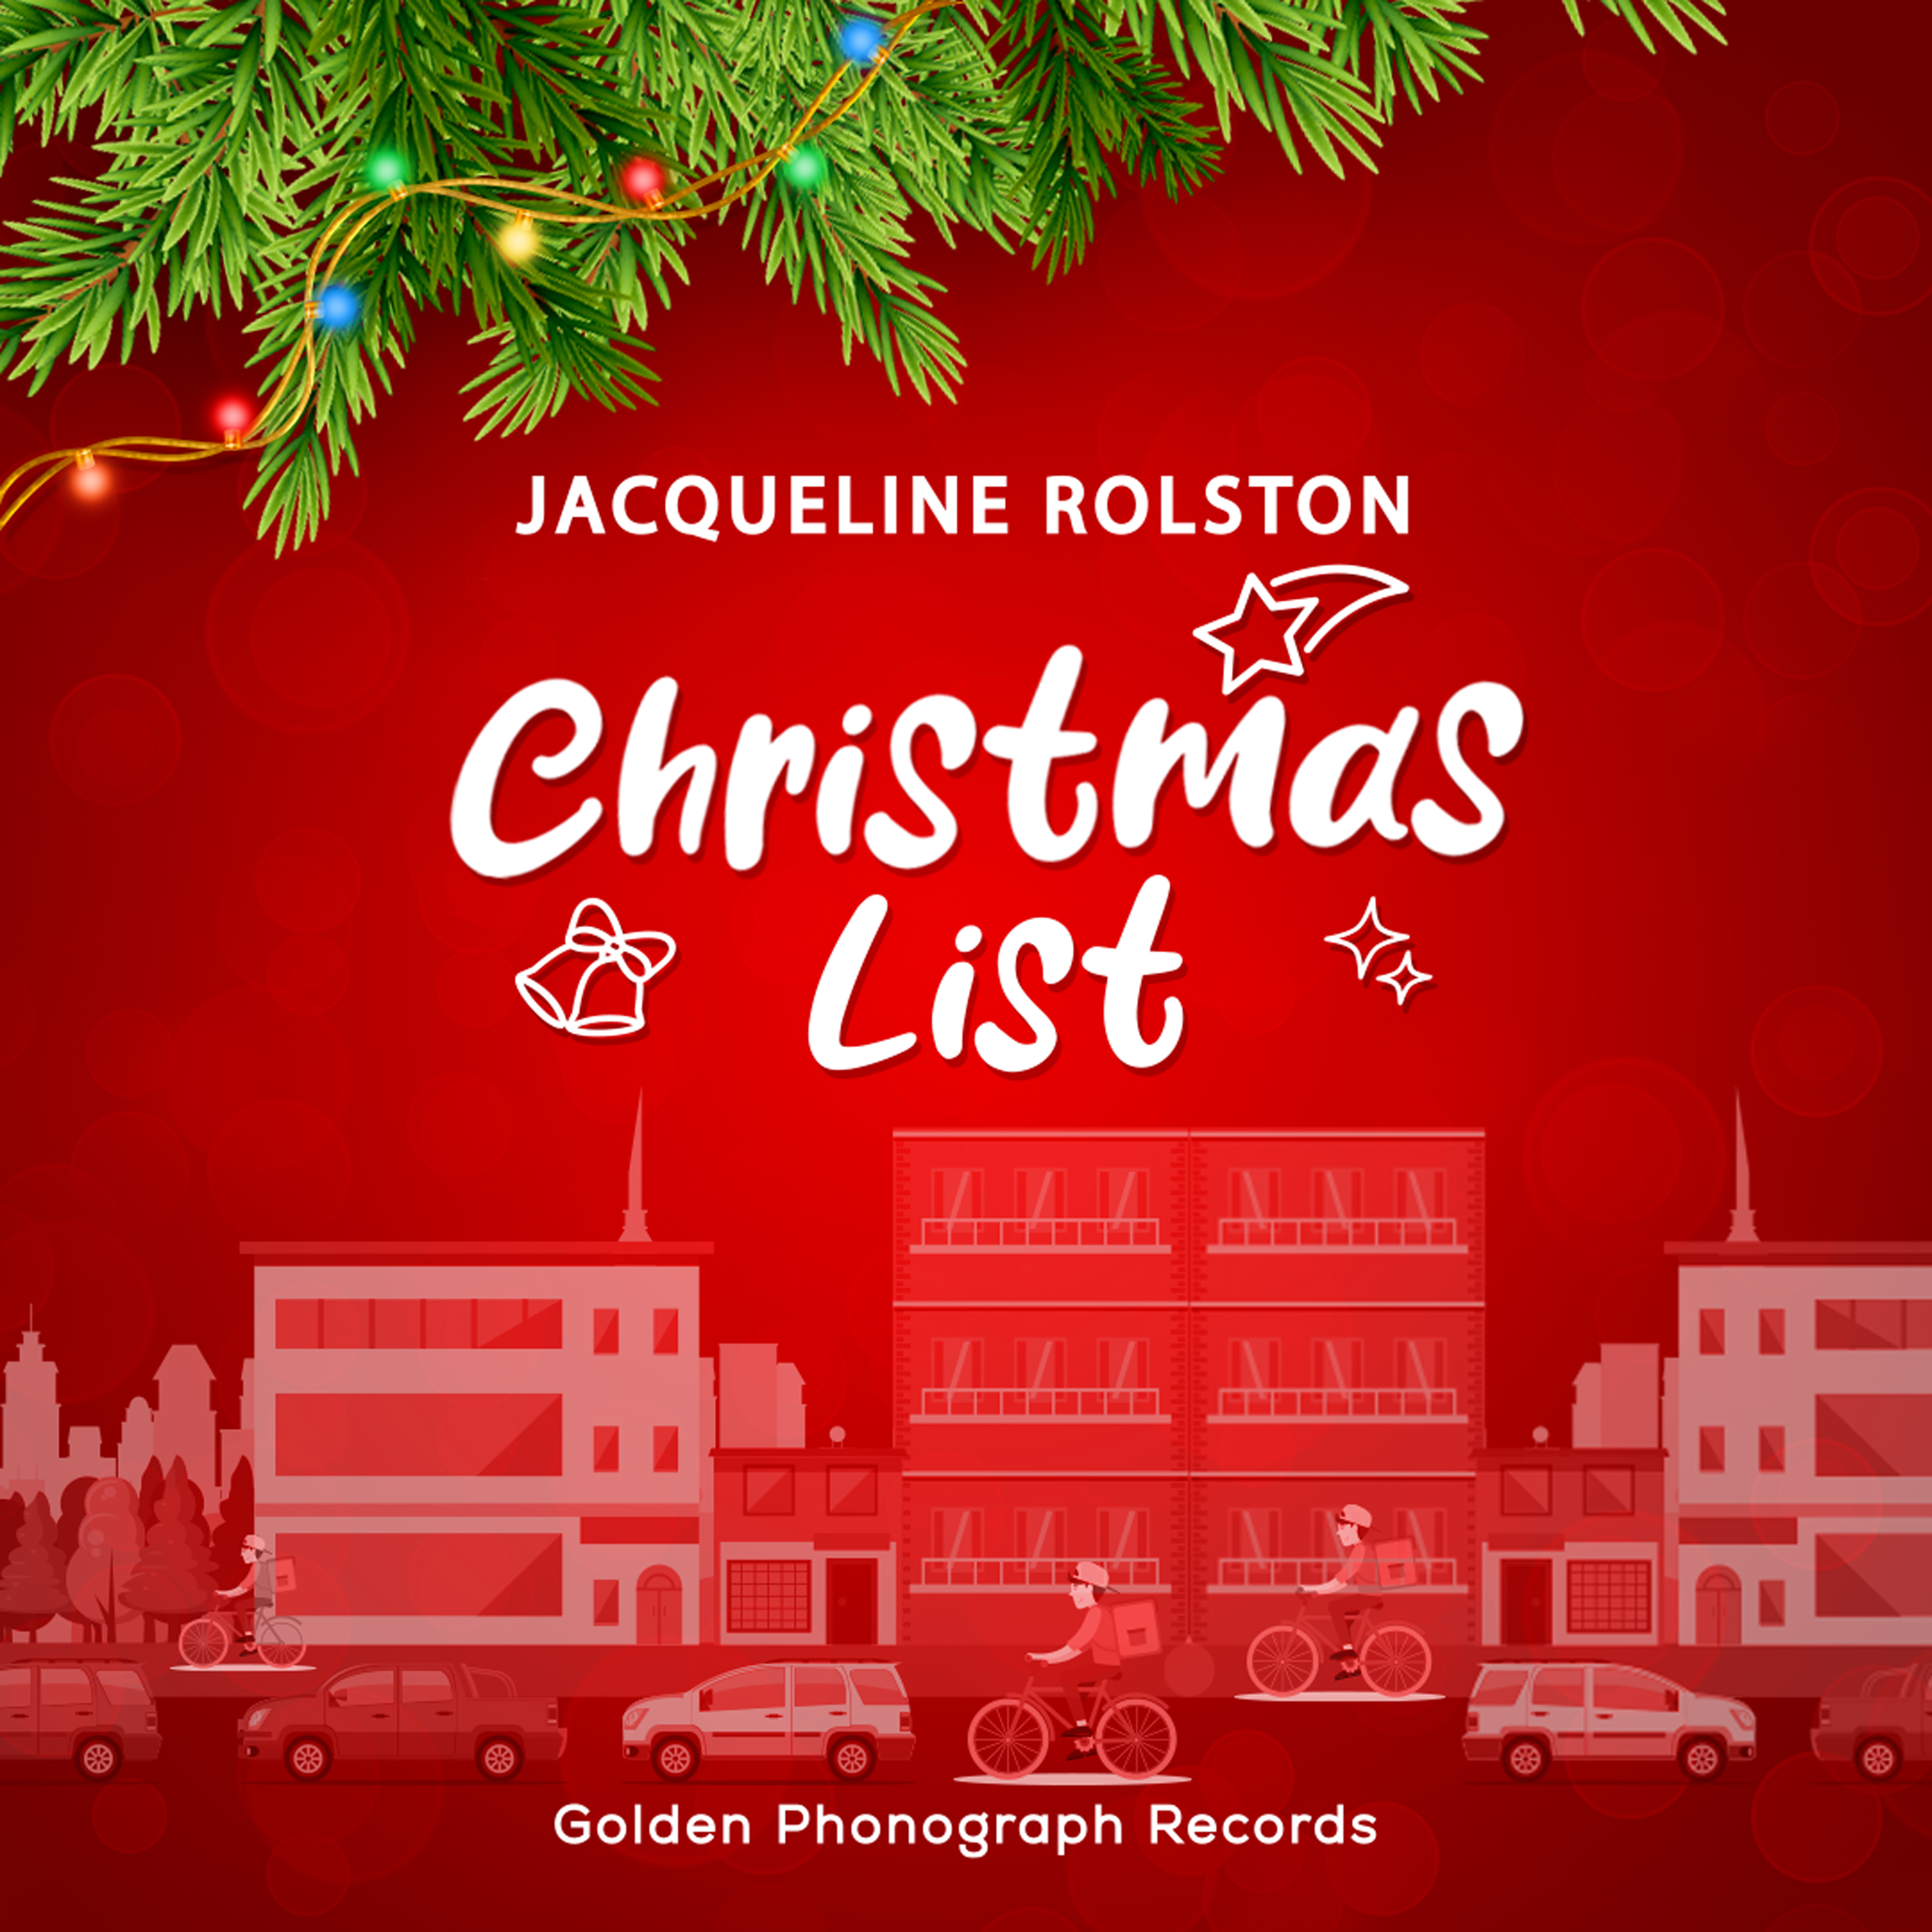 Jacqueline Rolston: "CHRISTMAS LIST" - The Christmas Song of the Year